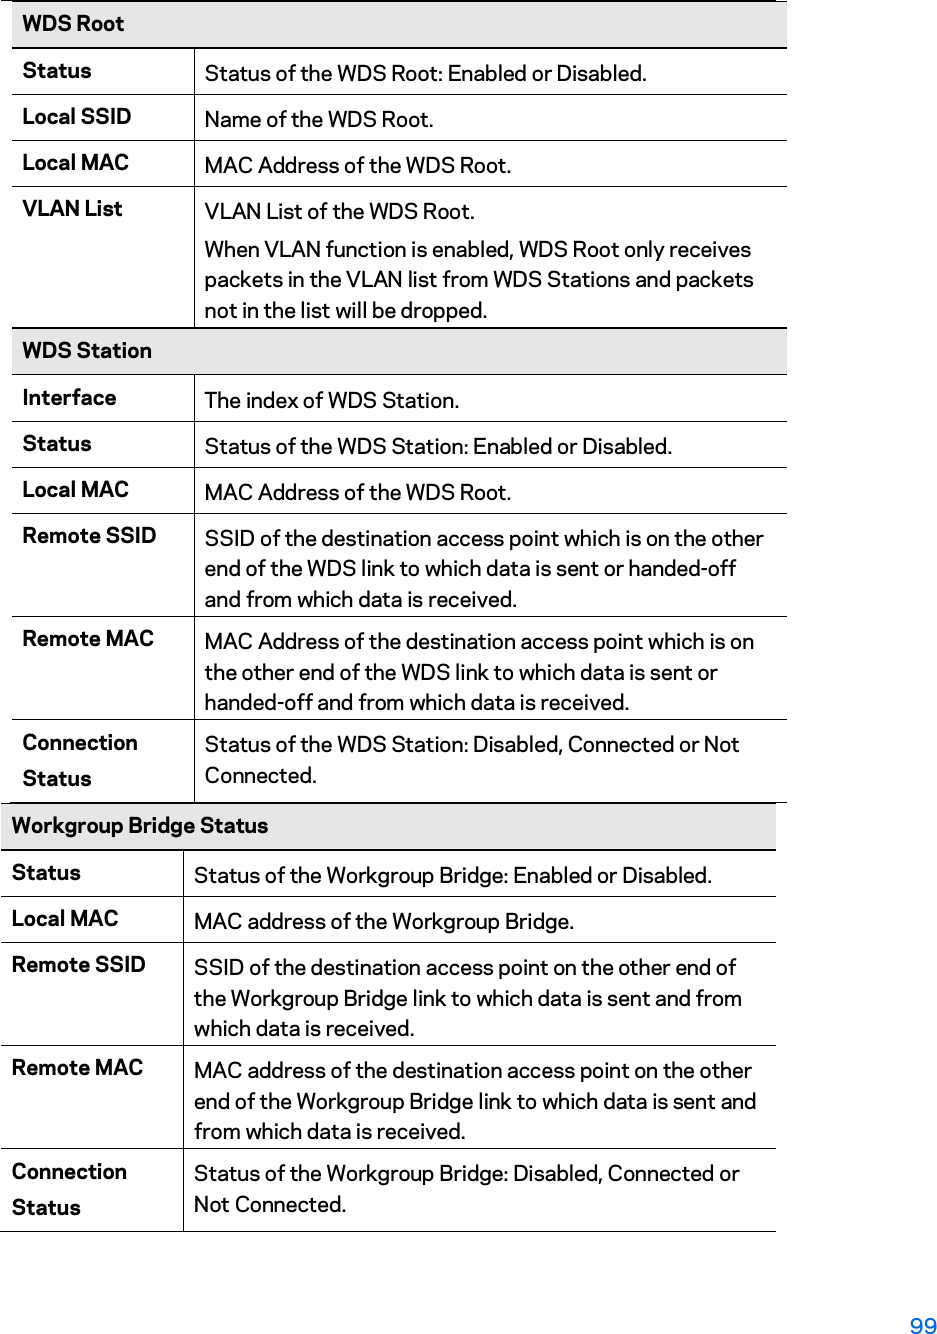 WDS Root Status  Status of the WDS Root: Enabled or Disabled. Local SSID  Name of the WDS Root. Local MAC  MAC Address of the WDS Root. VLAN List  VLAN List of the WDS Root. When VLAN function is enabled, WDS Root only receives packets in the VLAN list from WDS Stations and packets not in the list will be dropped.  WDS Station Interface  The index of WDS Station. Status  Status of the WDS Station: Enabled or Disabled. Local MAC  MAC Address of the WDS Root. Remote SSID  SSID of the destination access point which is on the other end of the WDS link to which data is sent or handed-off and from which data is received. Remote MAC  MAC Address of the destination access point which is on the other end of the WDS link to which data is sent or handed-off and from which data is received. Connection Status Status of the WDS Station: Disabled, Connected or Not Connected.  Workgroup Bridge Status Status  Status of the Workgroup Bridge: Enabled or Disabled. Local MAC  MAC address of the Workgroup Bridge. Remote SSID  SSID of the destination access point on the other end of the Workgroup Bridge link to which data is sent and from which data is received. Remote MAC  MAC address of the destination access point on the other end of the Workgroup Bridge link to which data is sent and from which data is received. Connection Status Status of the Workgroup Bridge: Disabled, Connected or Not Connected. 99 